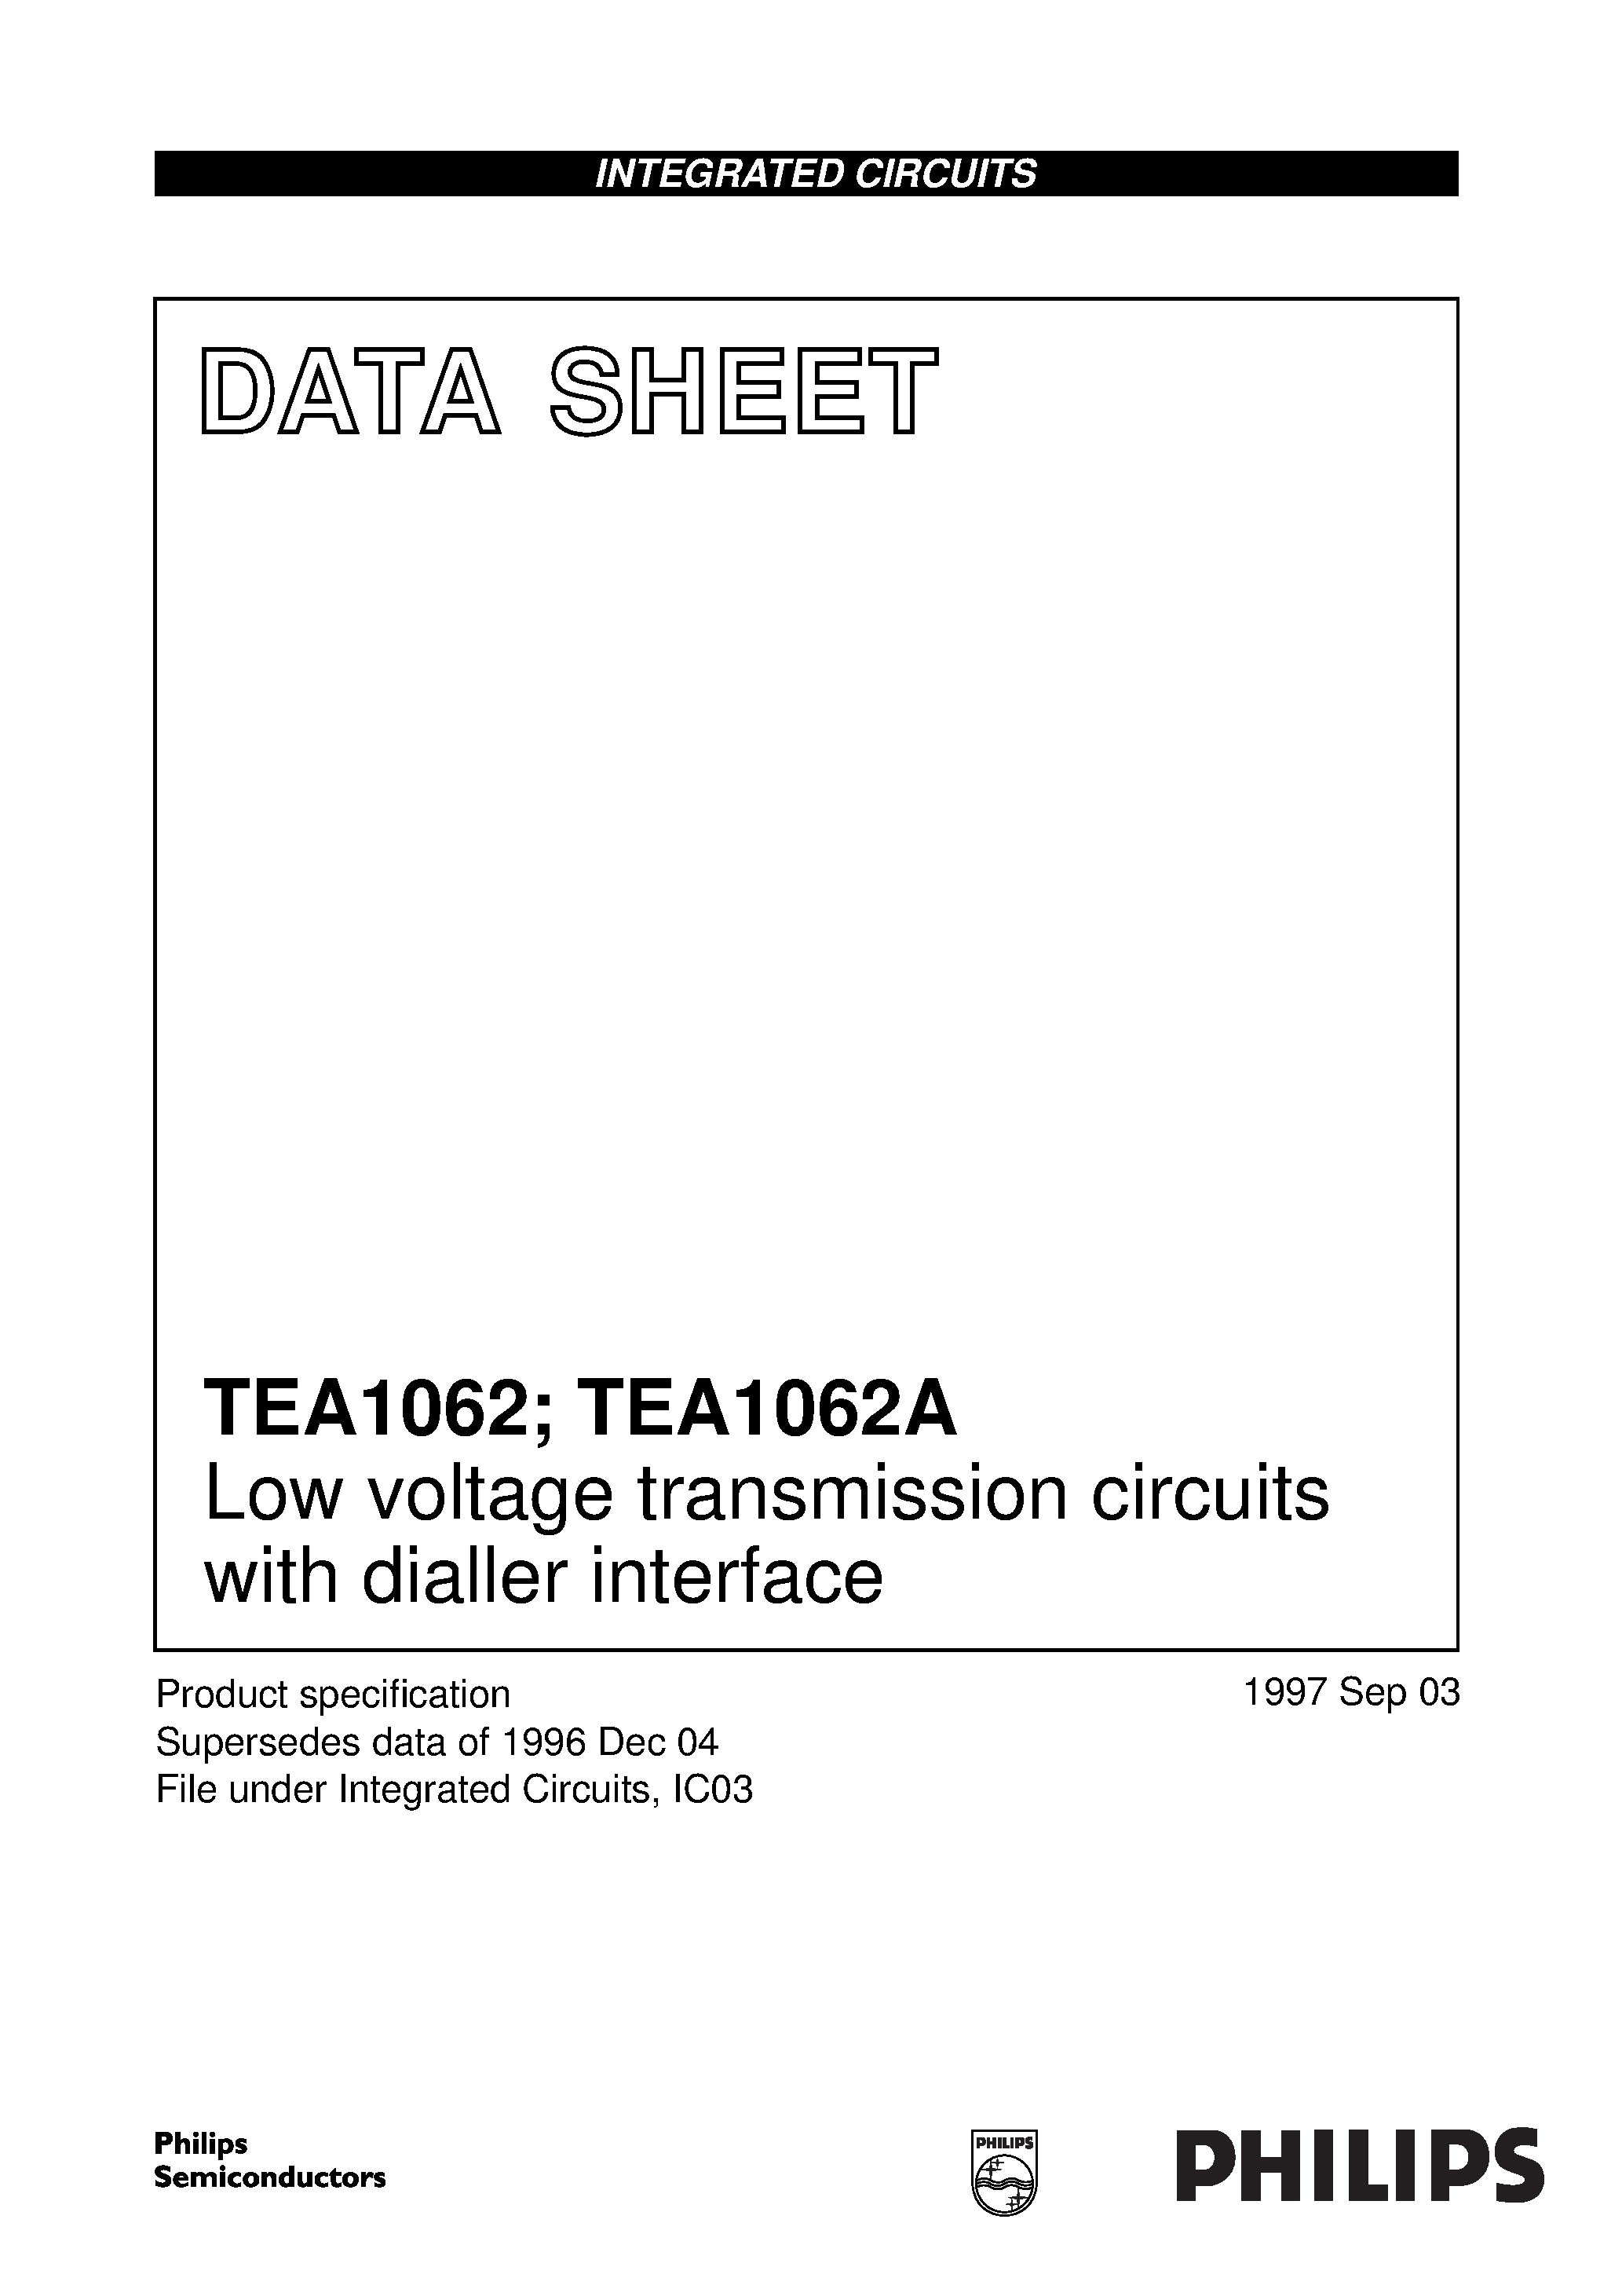 Datasheet TEA1062AT - Low voltage transmission circuits with dialler interface page 1